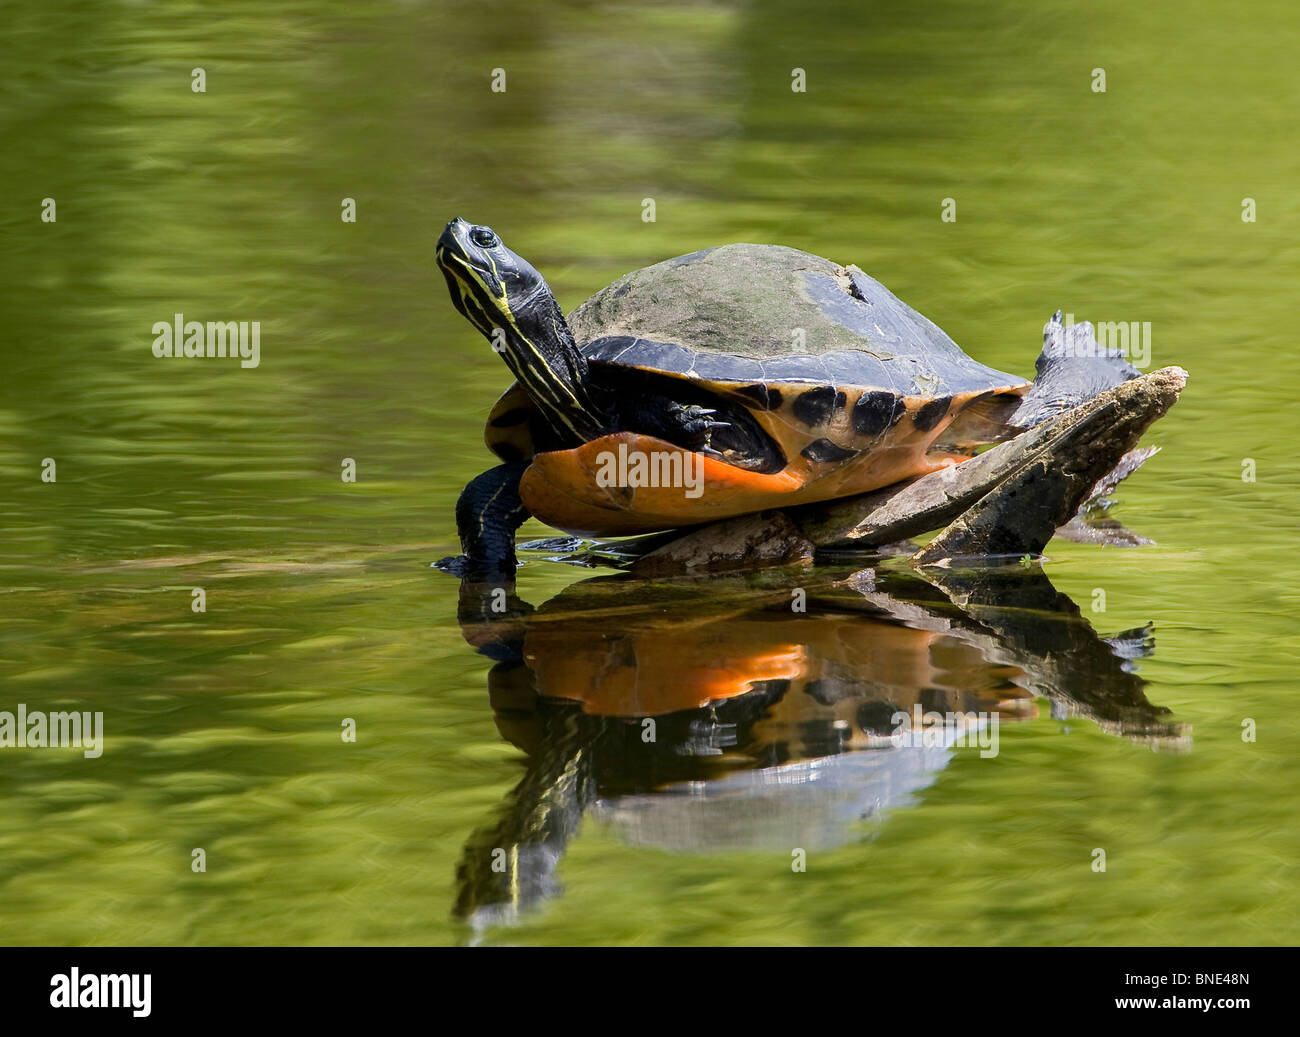 Florida Redbelly turtle (Pseudemys nelsoni) sunning on a log in river, Florida, USA Stock Photo